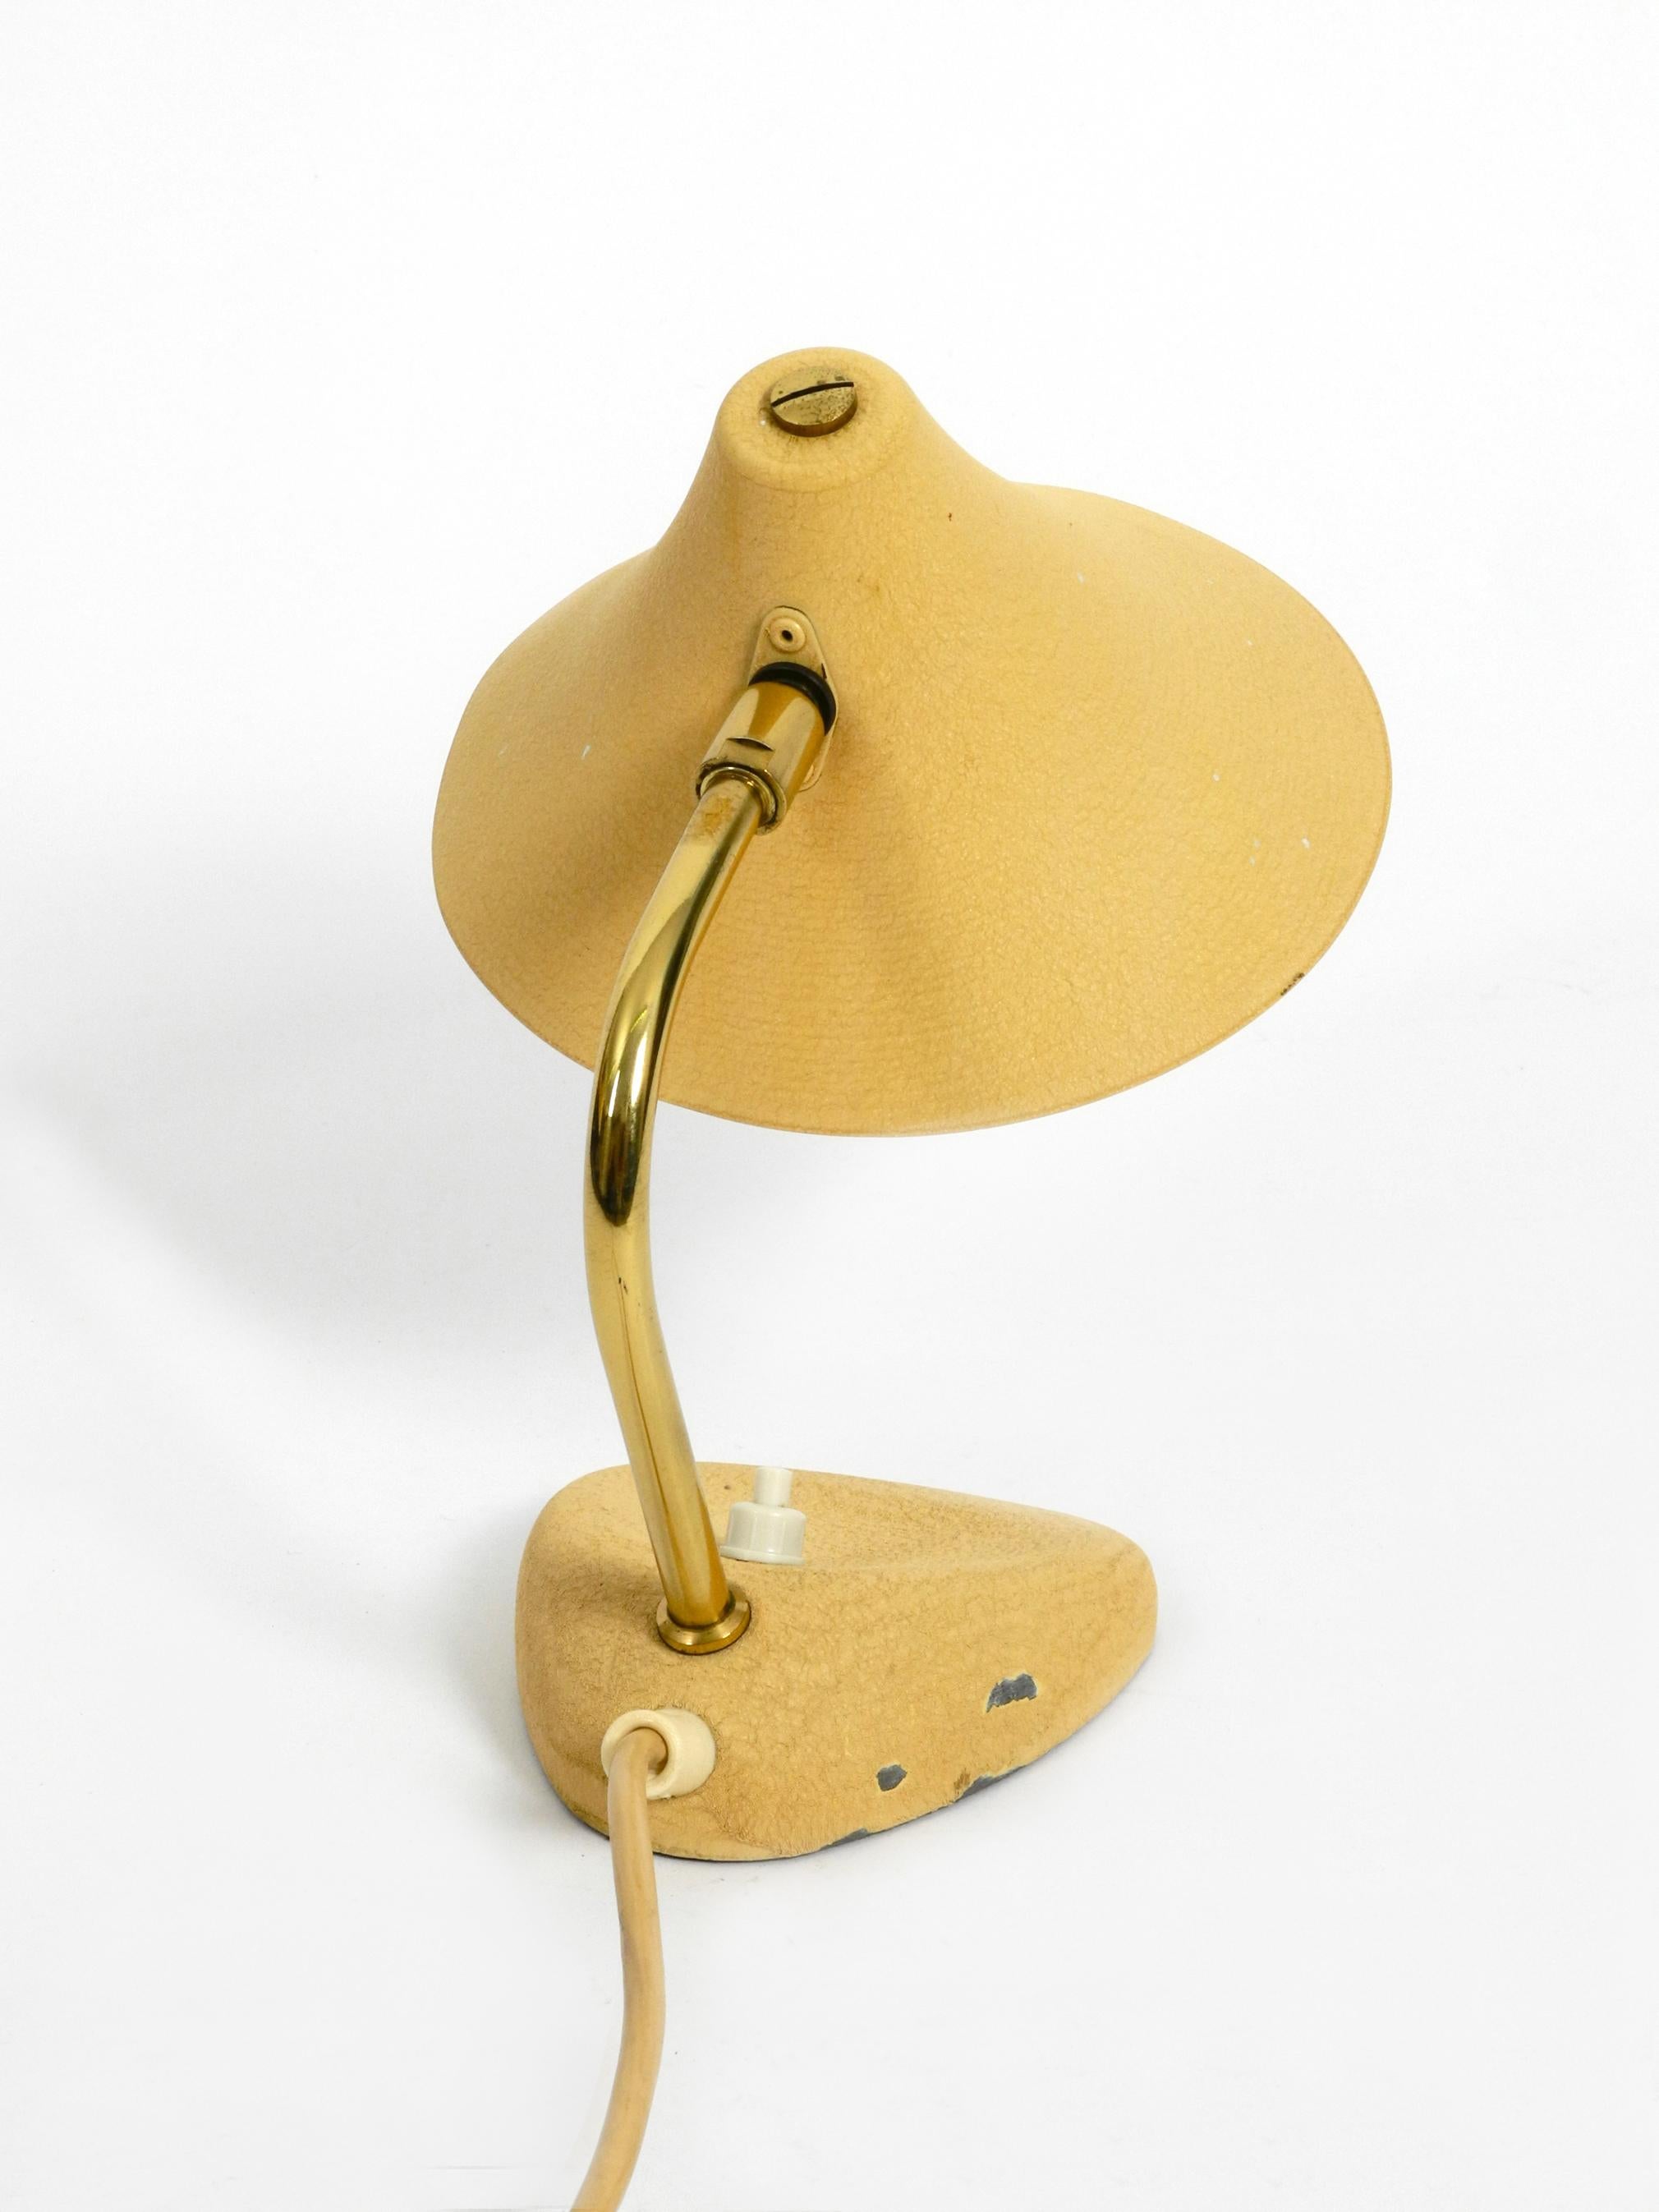 Small Midcentury Table Lamp with Beige Shrink Lacquer and Adjustable Shade In Good Condition For Sale In München, DE